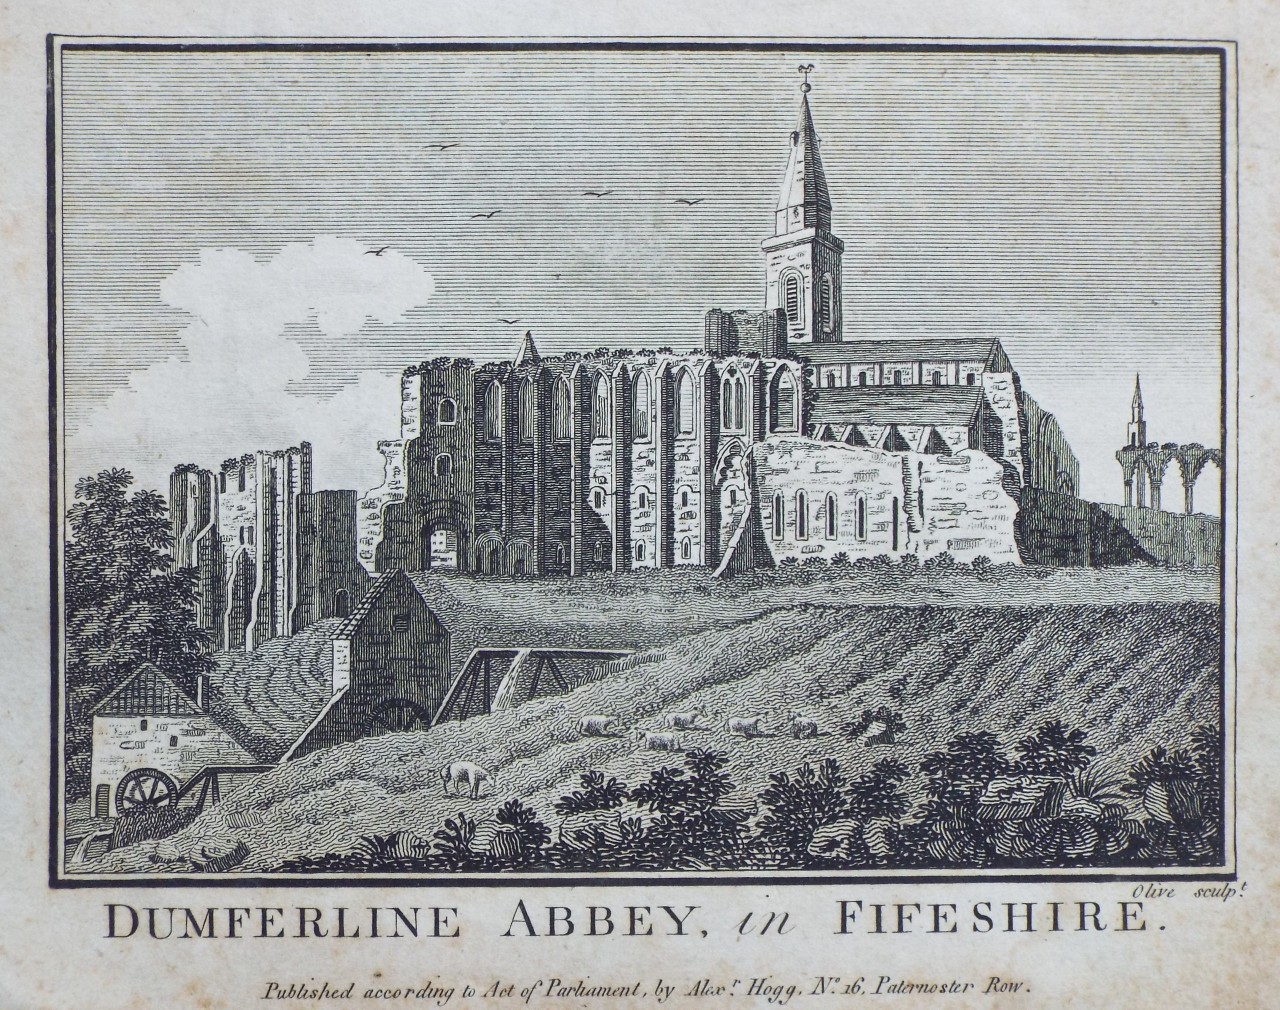 Print - Dunfermline Abbey, in Fifeshire. - 